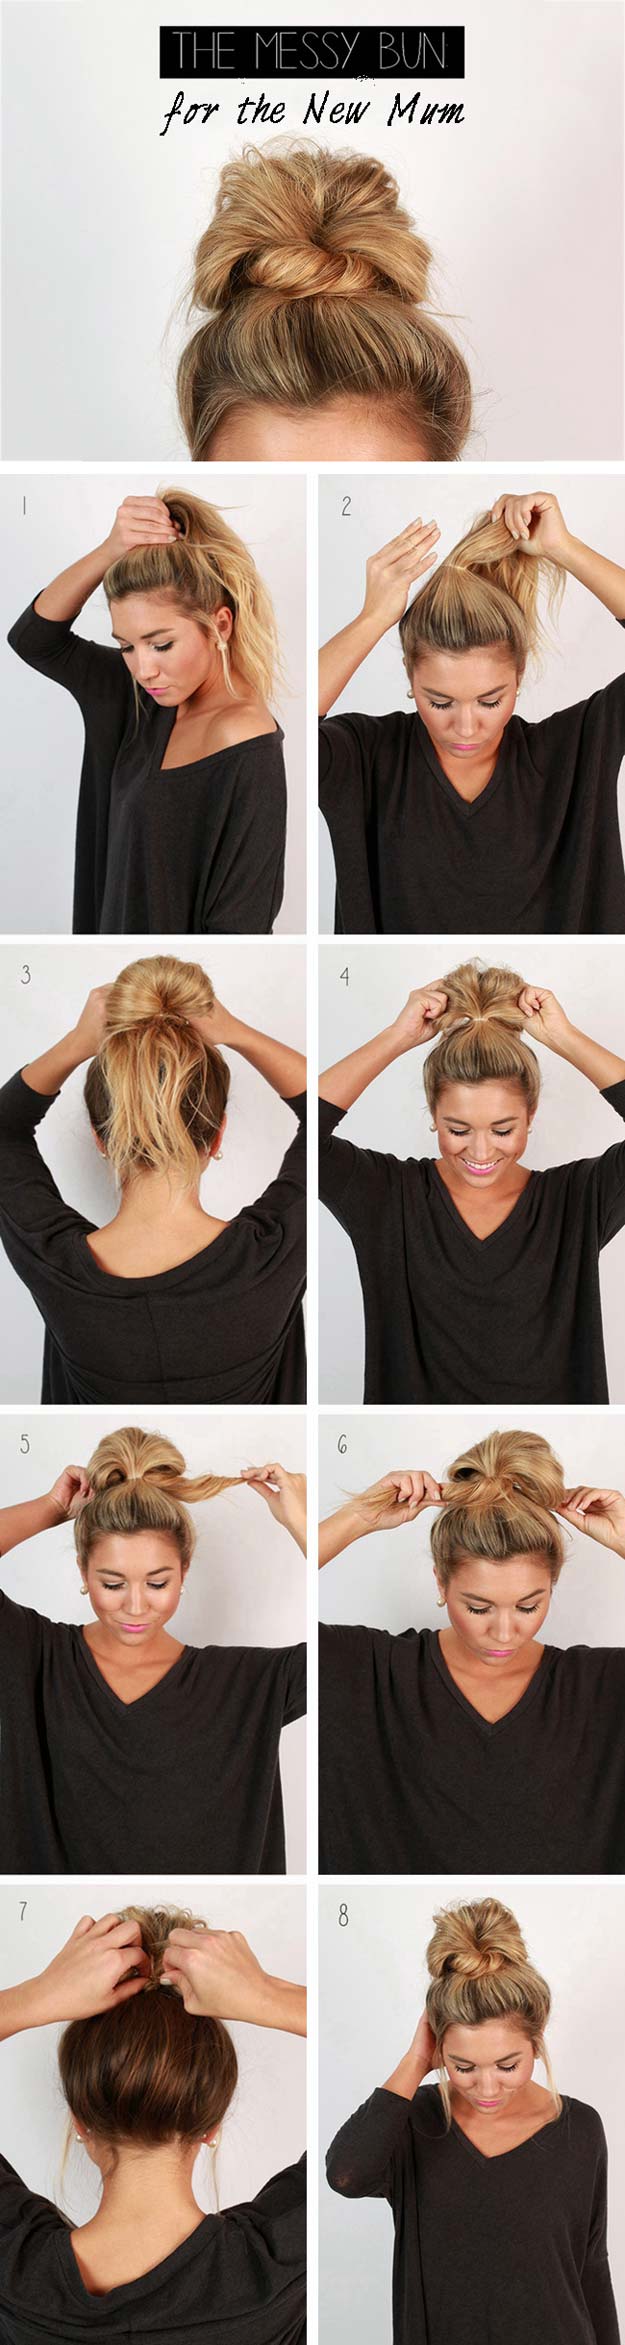 41 DIY Cool Easy Hairstyles That Real People Can Actually Do at Home!